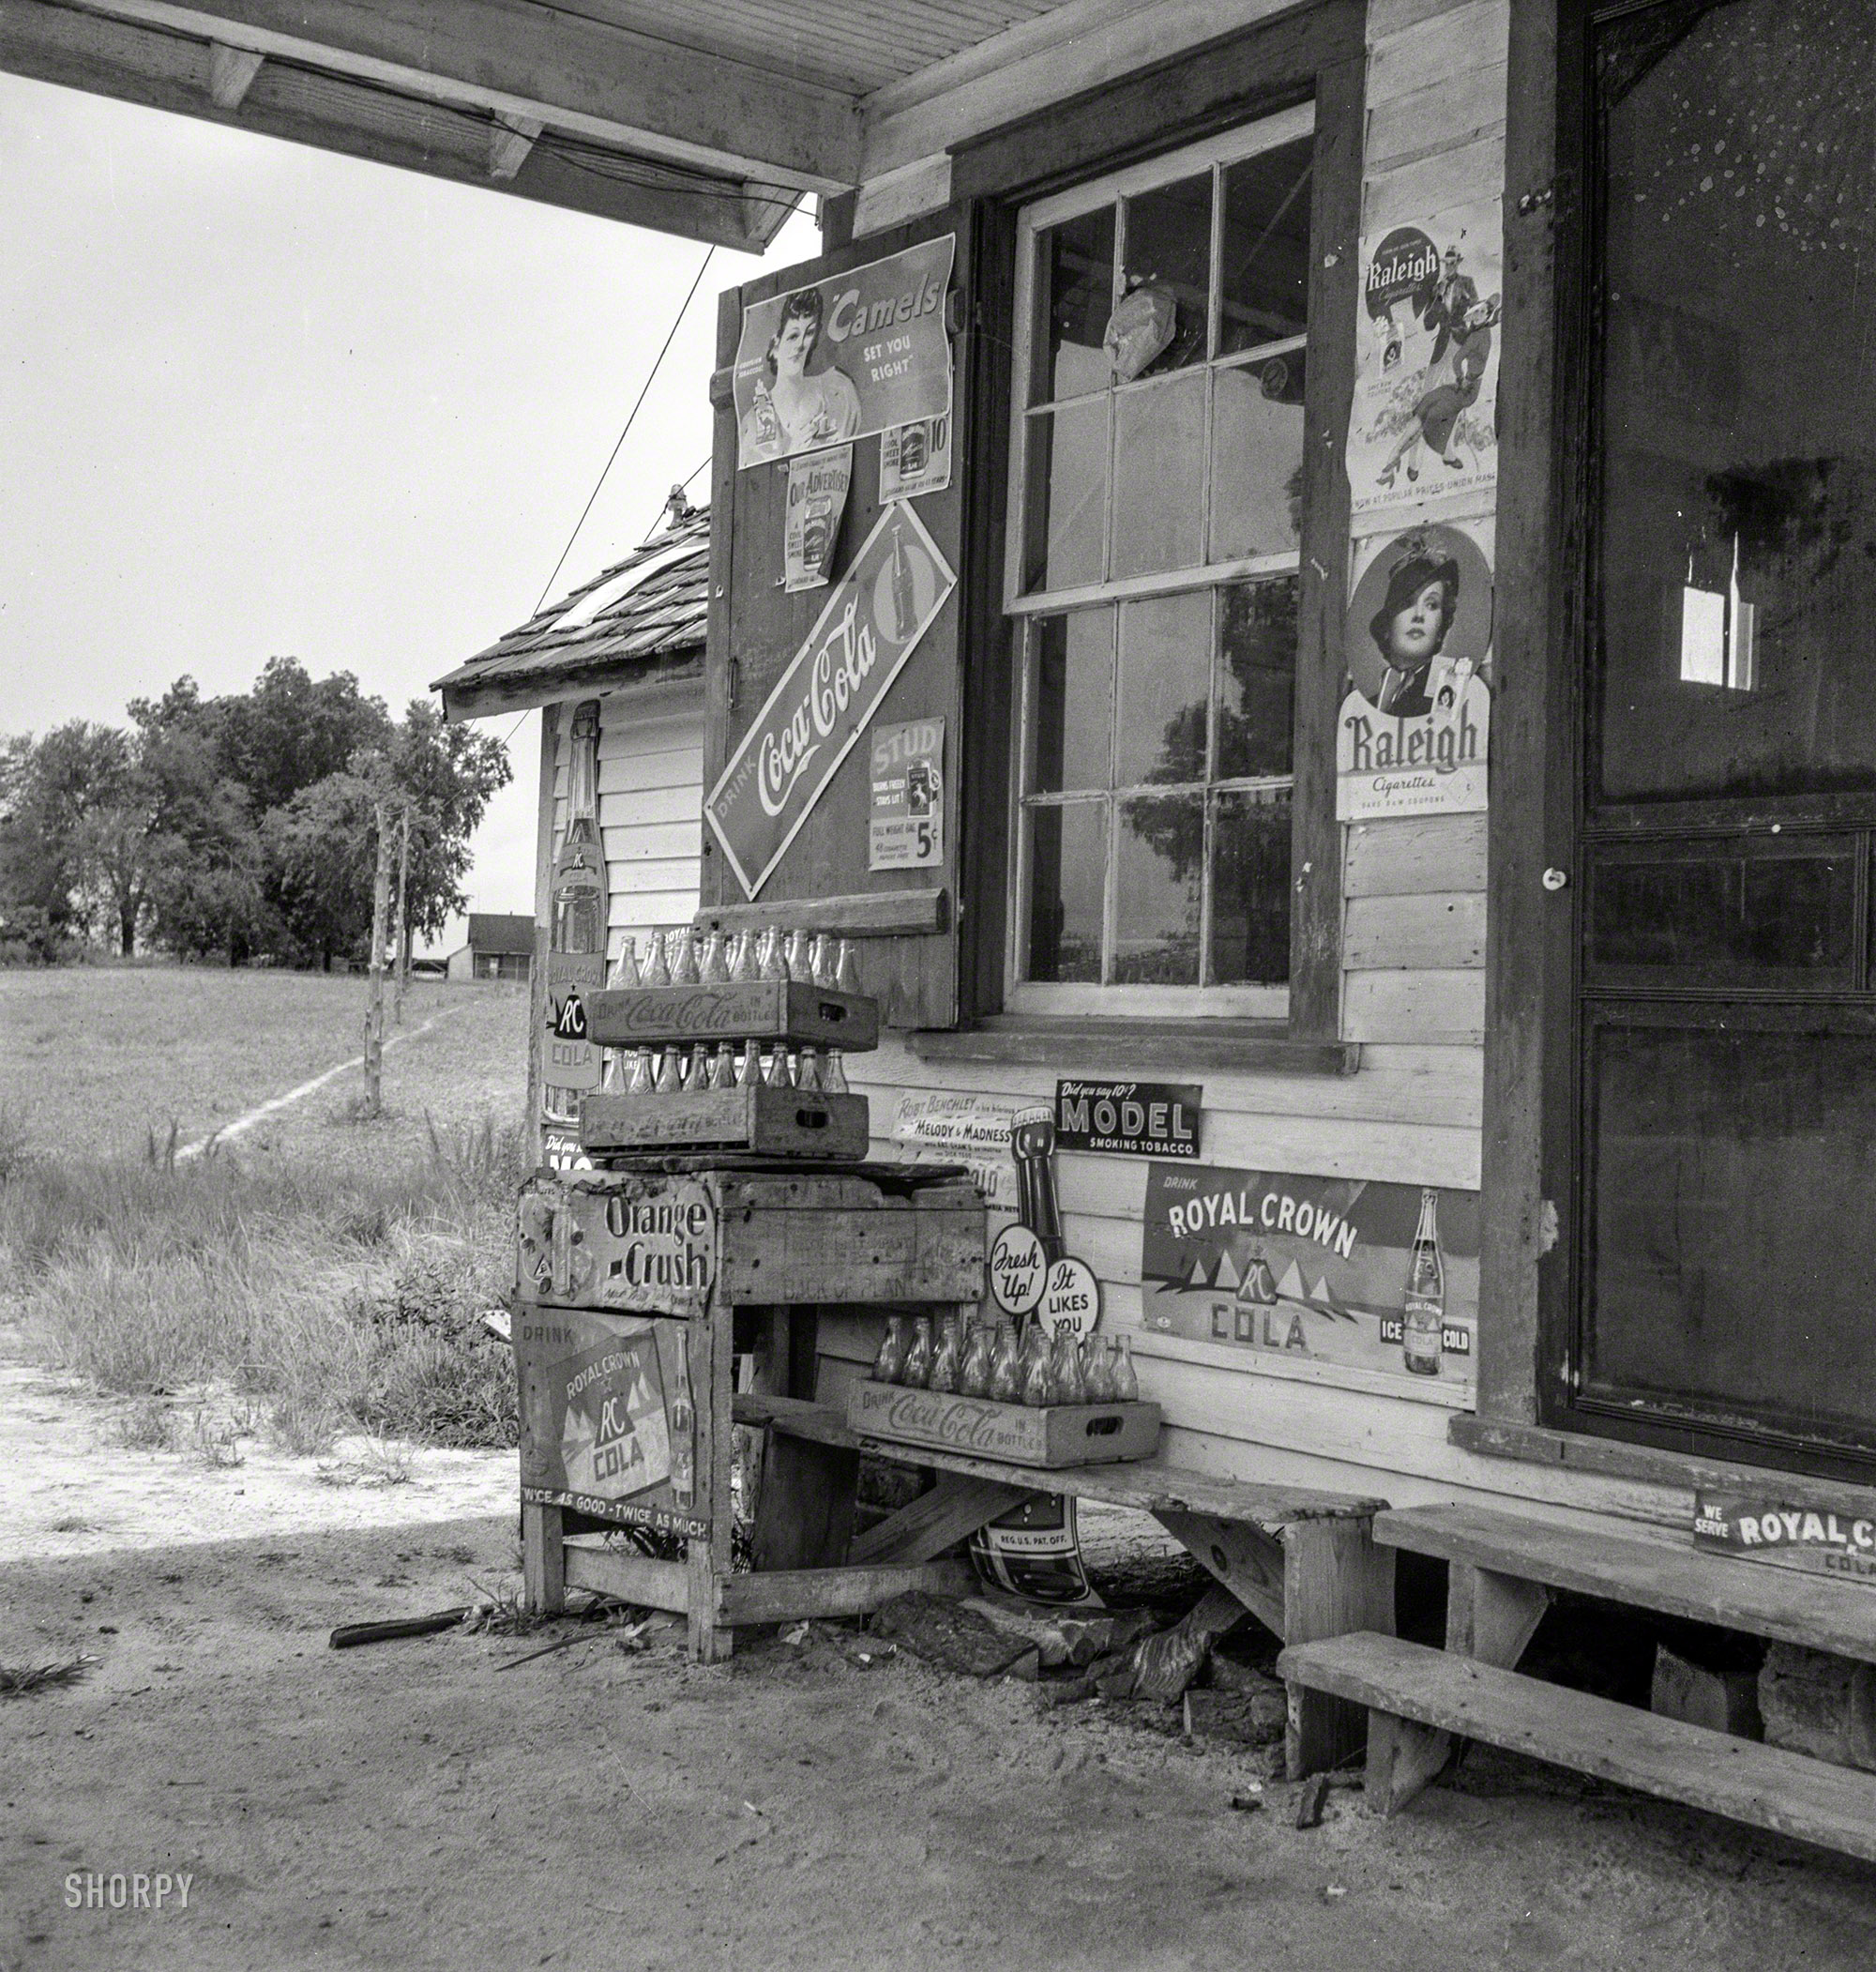 July 1939. Granville County, North Carolina. "Country filling station owned and operated by tobacco farmer. Such small independent stations have become meeting places and loafing spots for neighborhood farmers in their off times." Photo by Dorothea Lange for the Farm Security Administration. View full size.